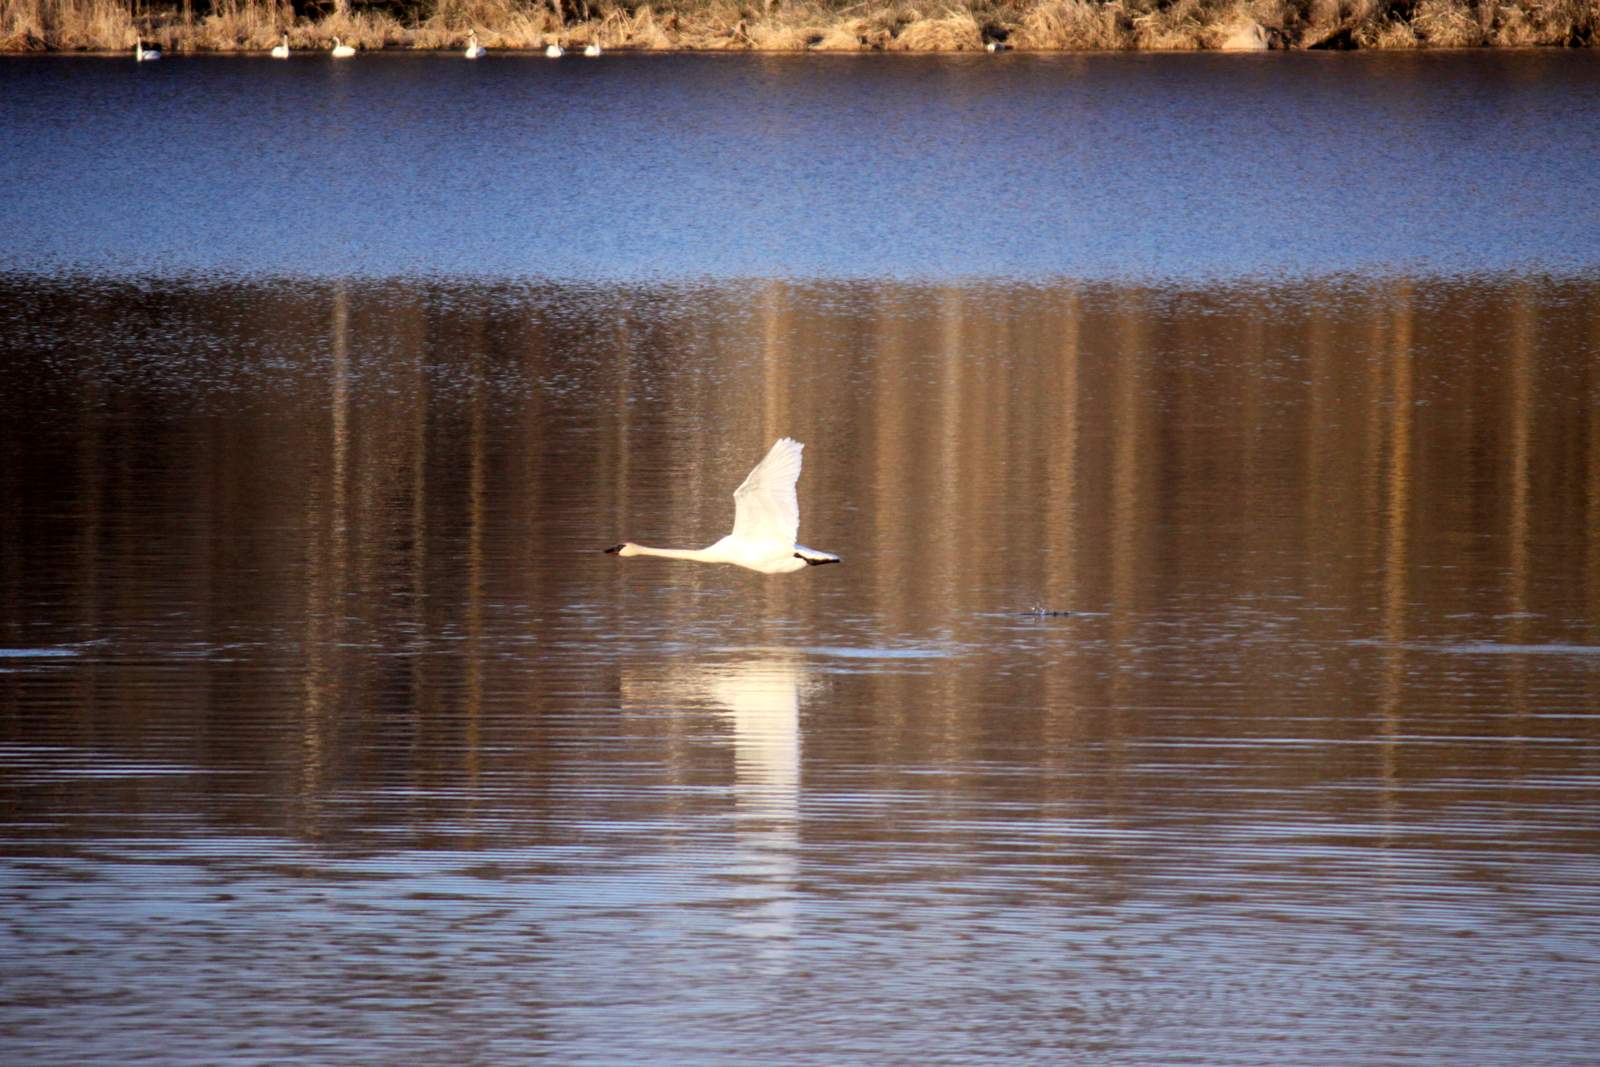 Trumpeter swan in flight above Little Sugarbush as a group swims near the shoreline. April 4th, 2016.